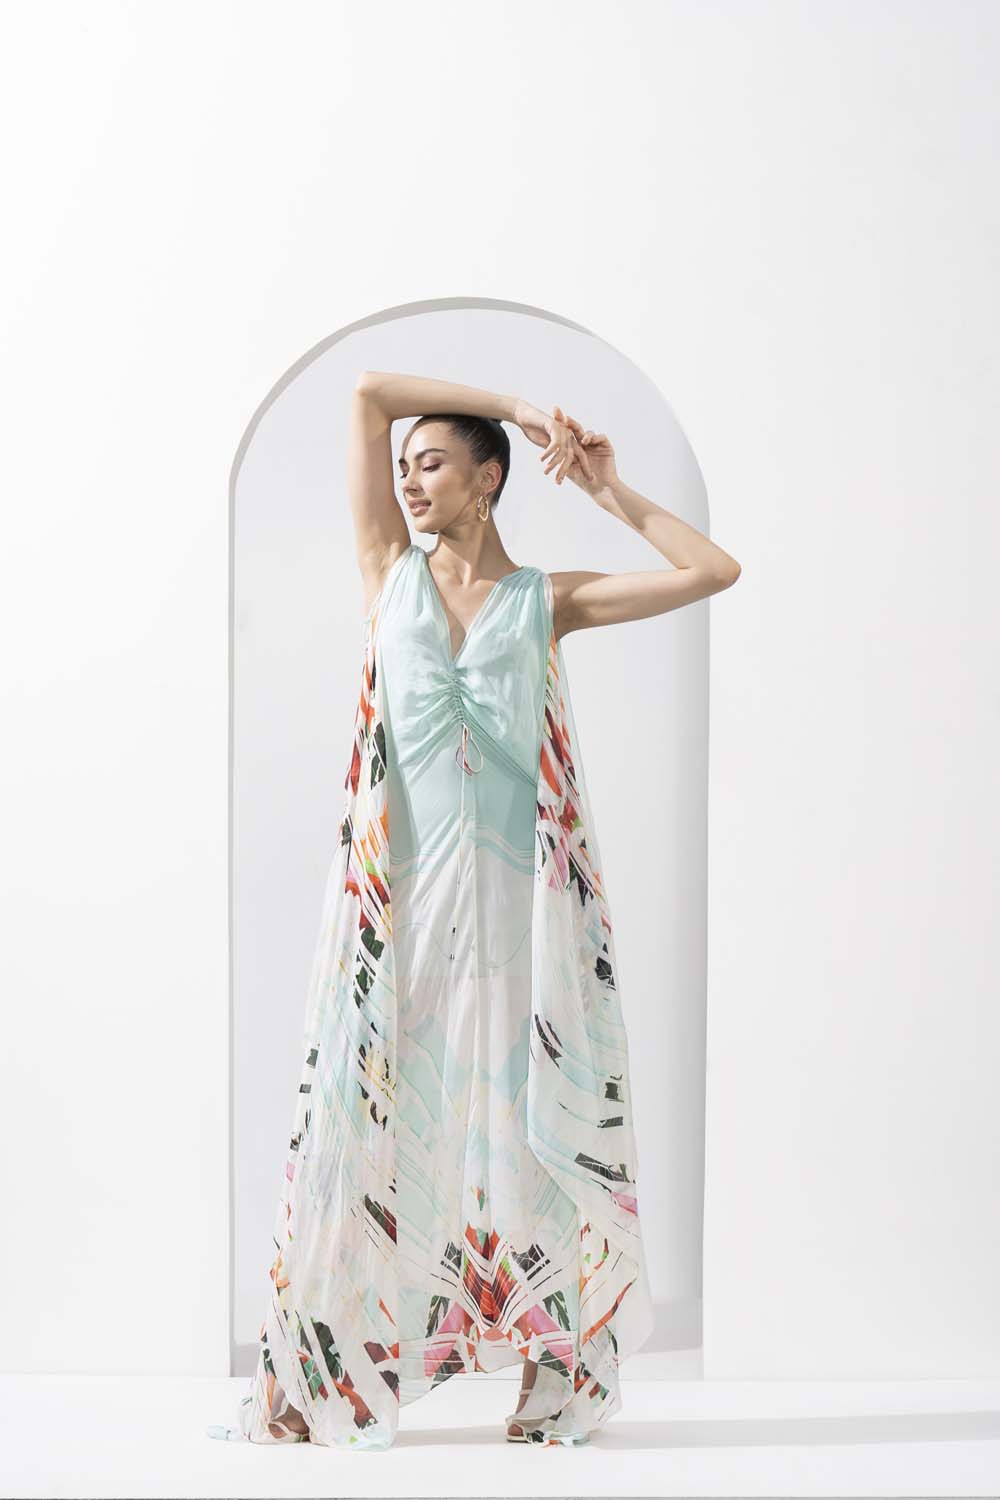 Ocean blue placement printed chiffon kaftan with an A-line hem and ruched detailing.